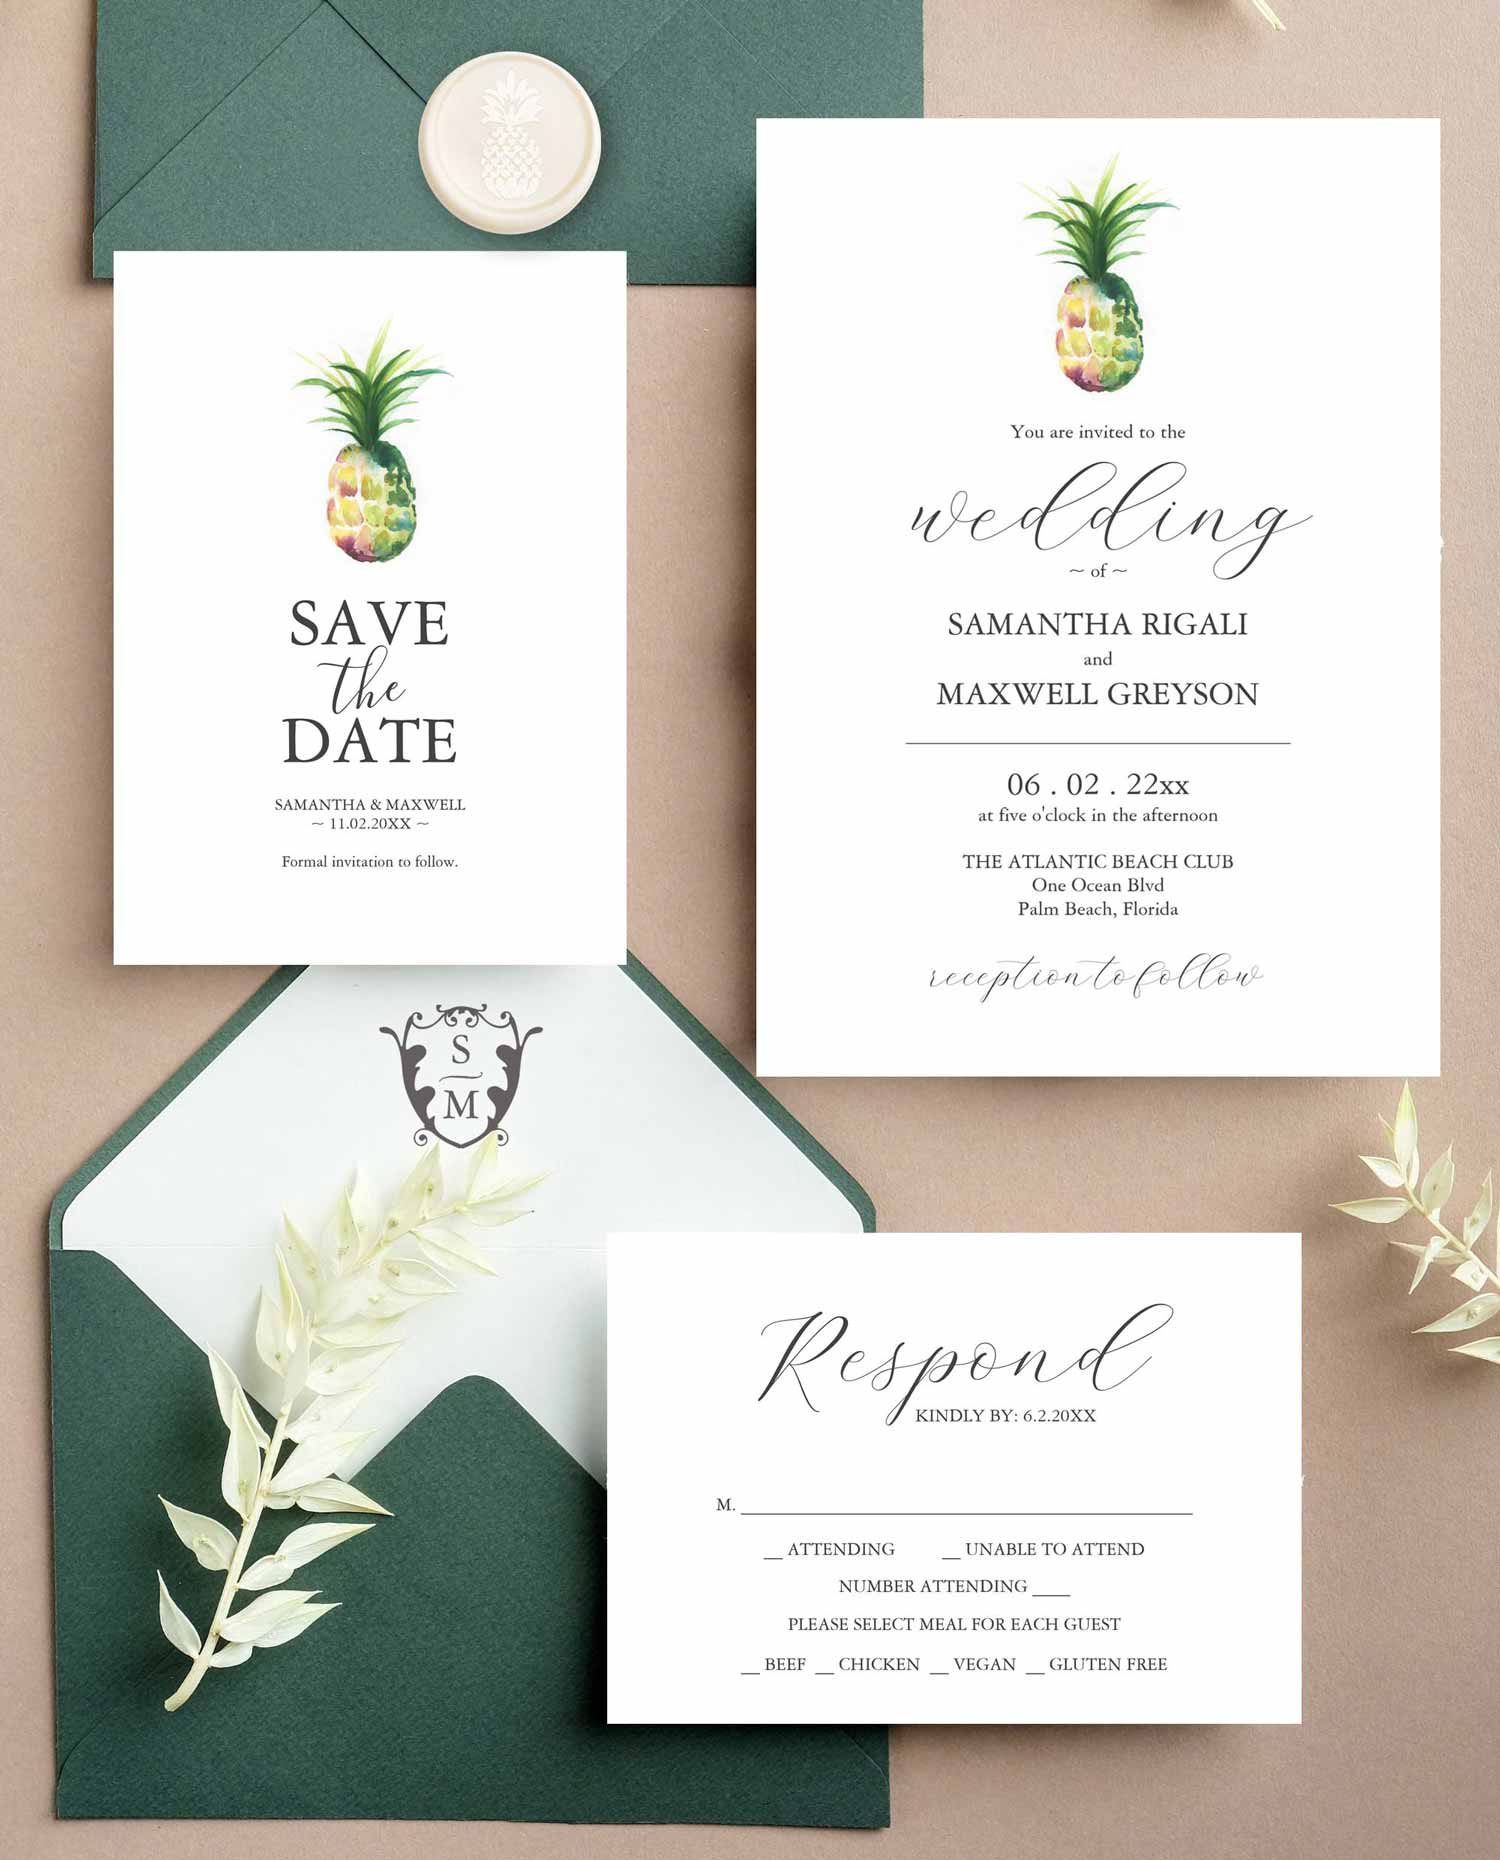 Destination wedding invitation theme features unique watercolor pineapple art and design by Victoria Grigaliunas of Do Tell A Belle. Click to shop the complete line.